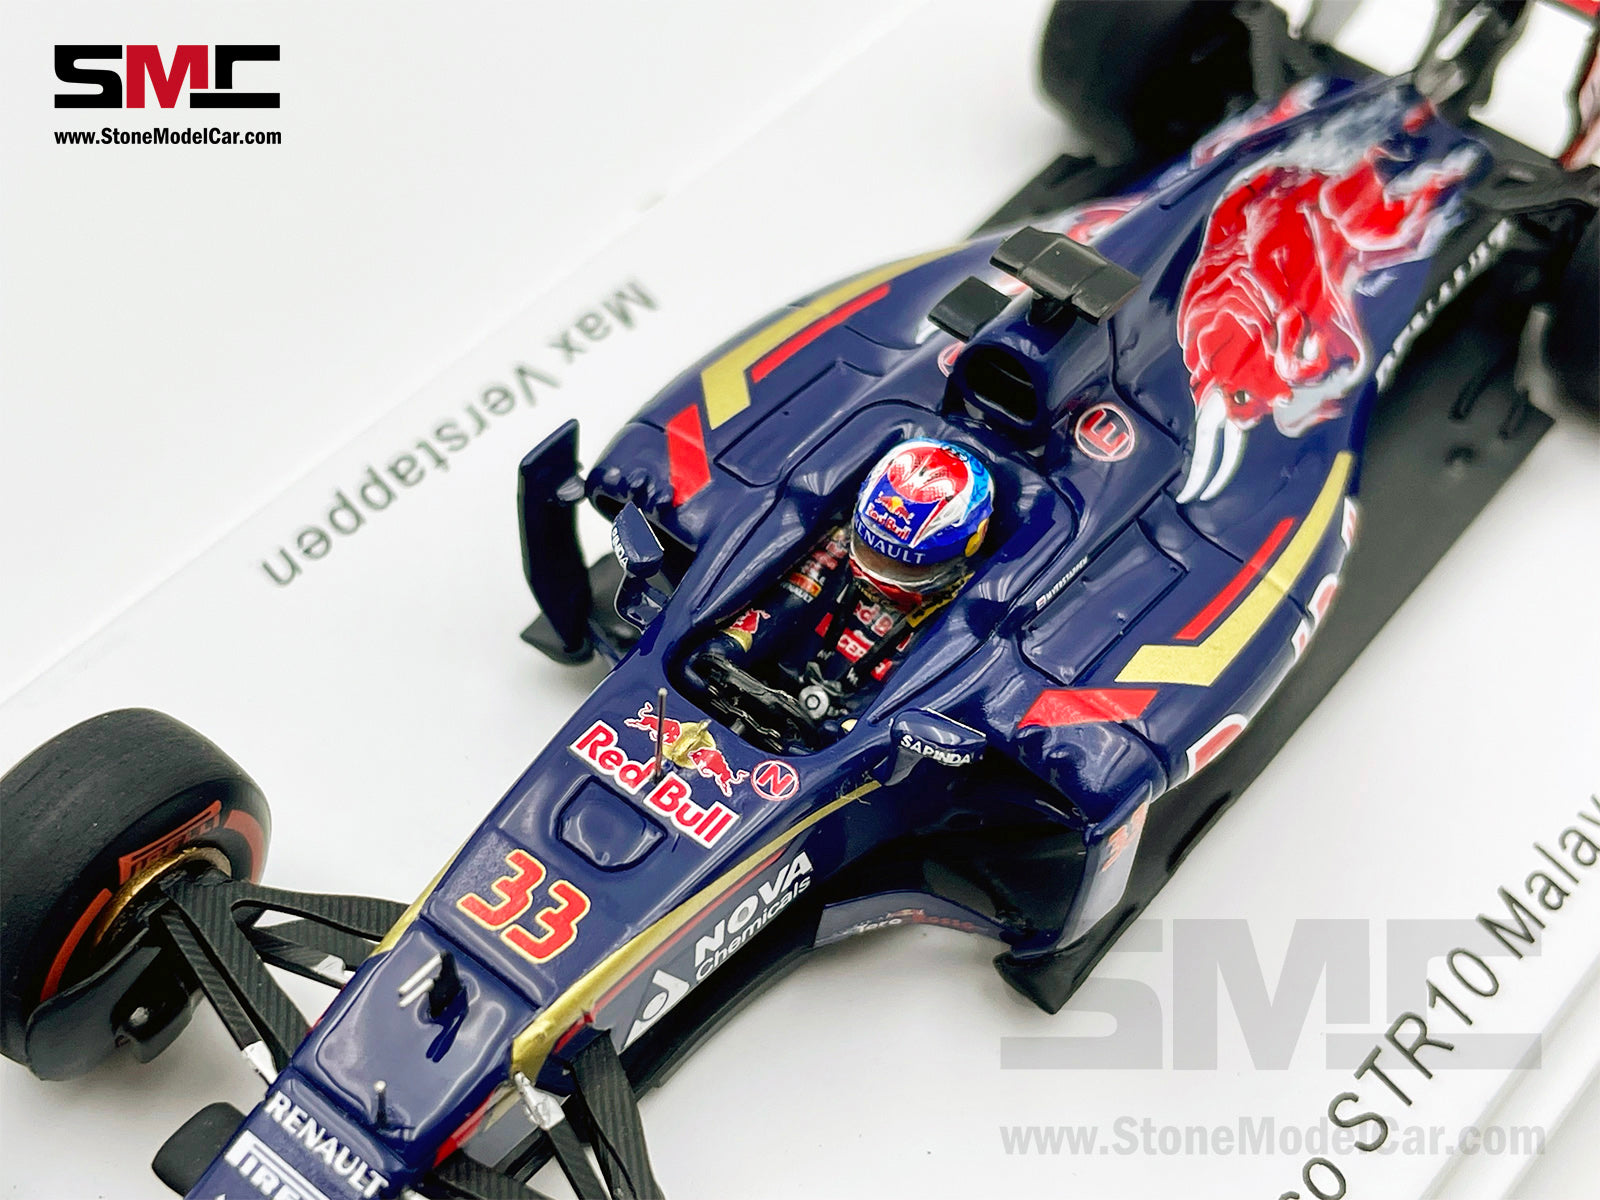 1:43 Spark Toro Rosso STR10 #33 Max Verstappen Malaysia 2015 F1 Youngest  Point